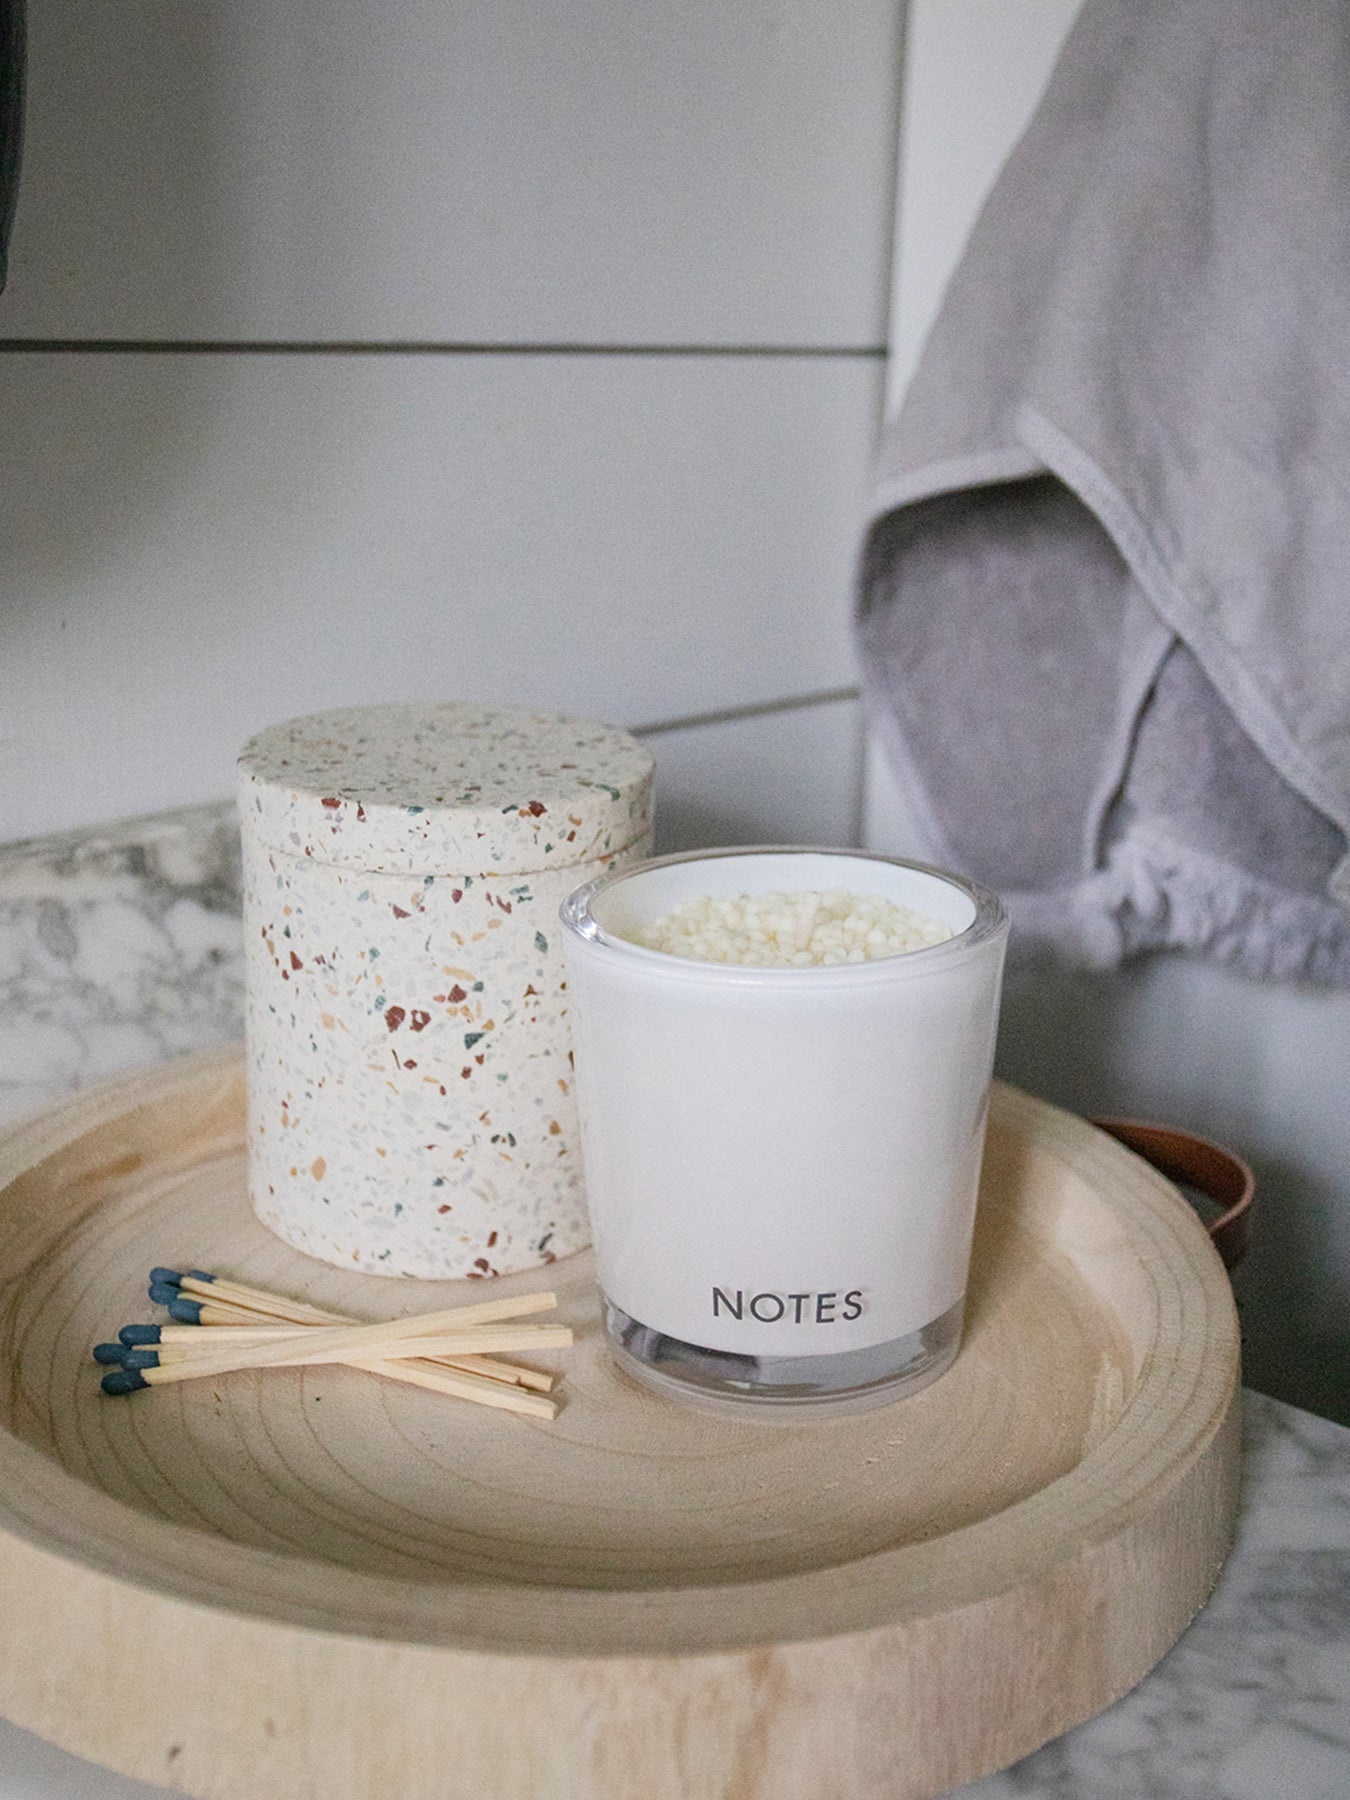 NOTES Sustainable Candle Refill Kit Linen & Crisp Air